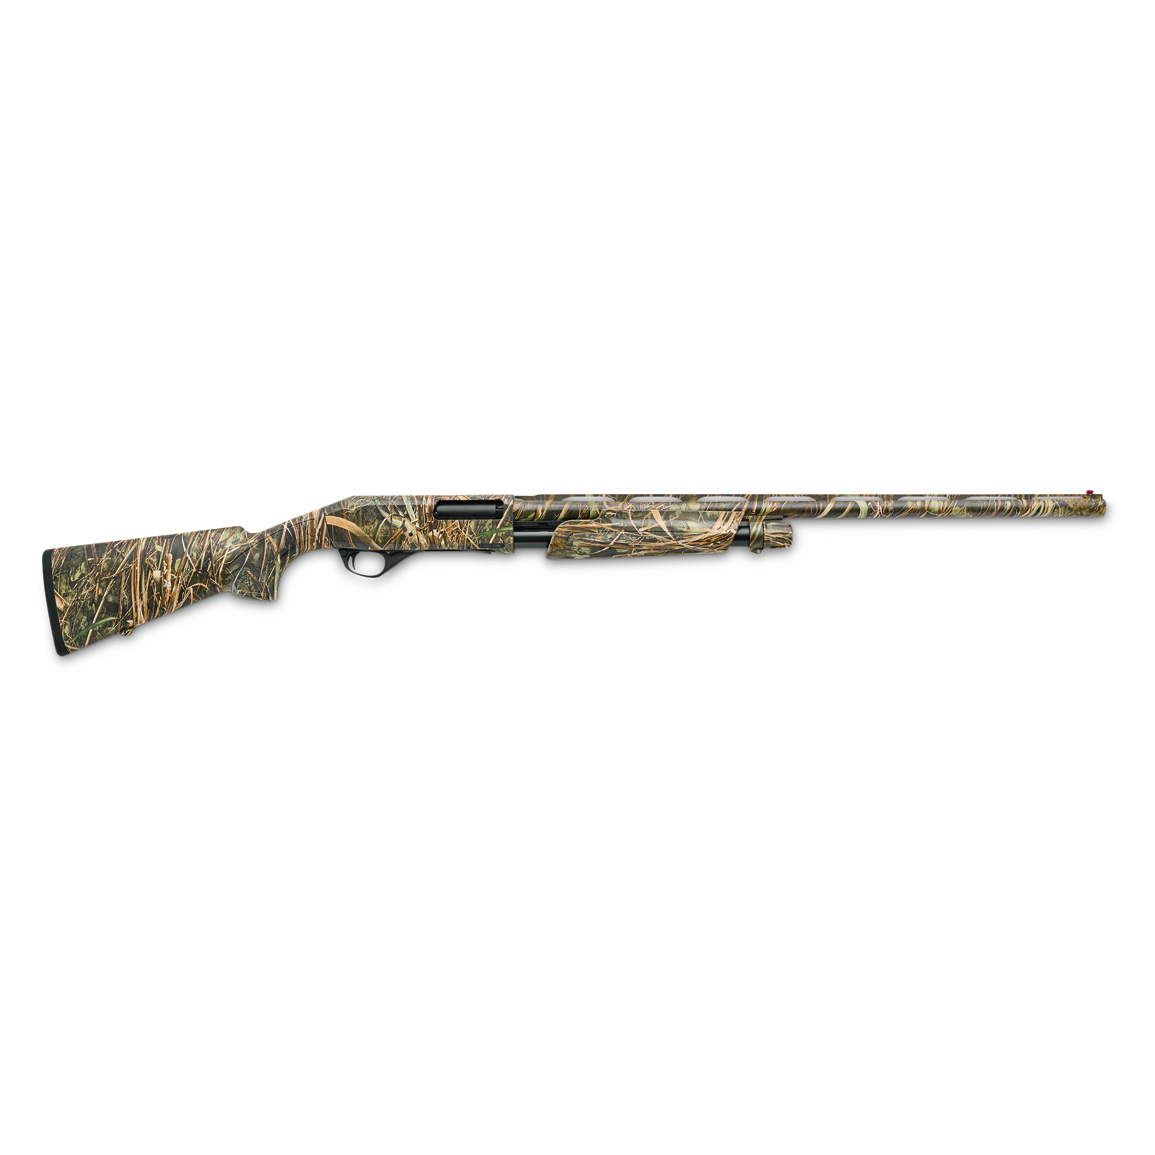 Stoeger P3000, Pump Action, 12 Gauge, 28" Barrel, Realtree MAX-7 Synthetic, 5+1 Rounds